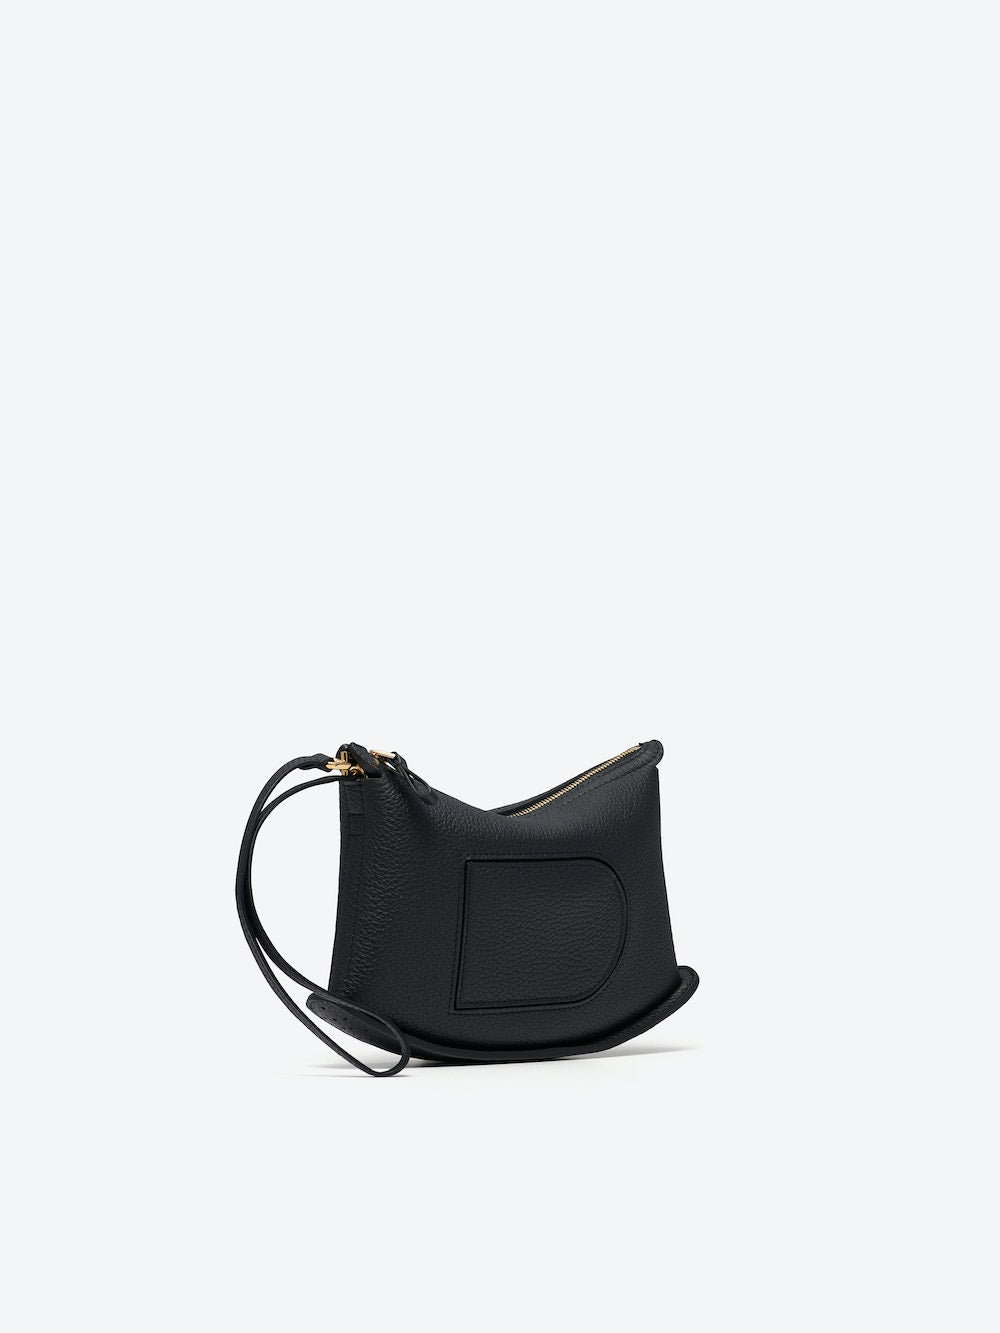 Delvaux Co-Pin Taurillon 軟色（黑色）